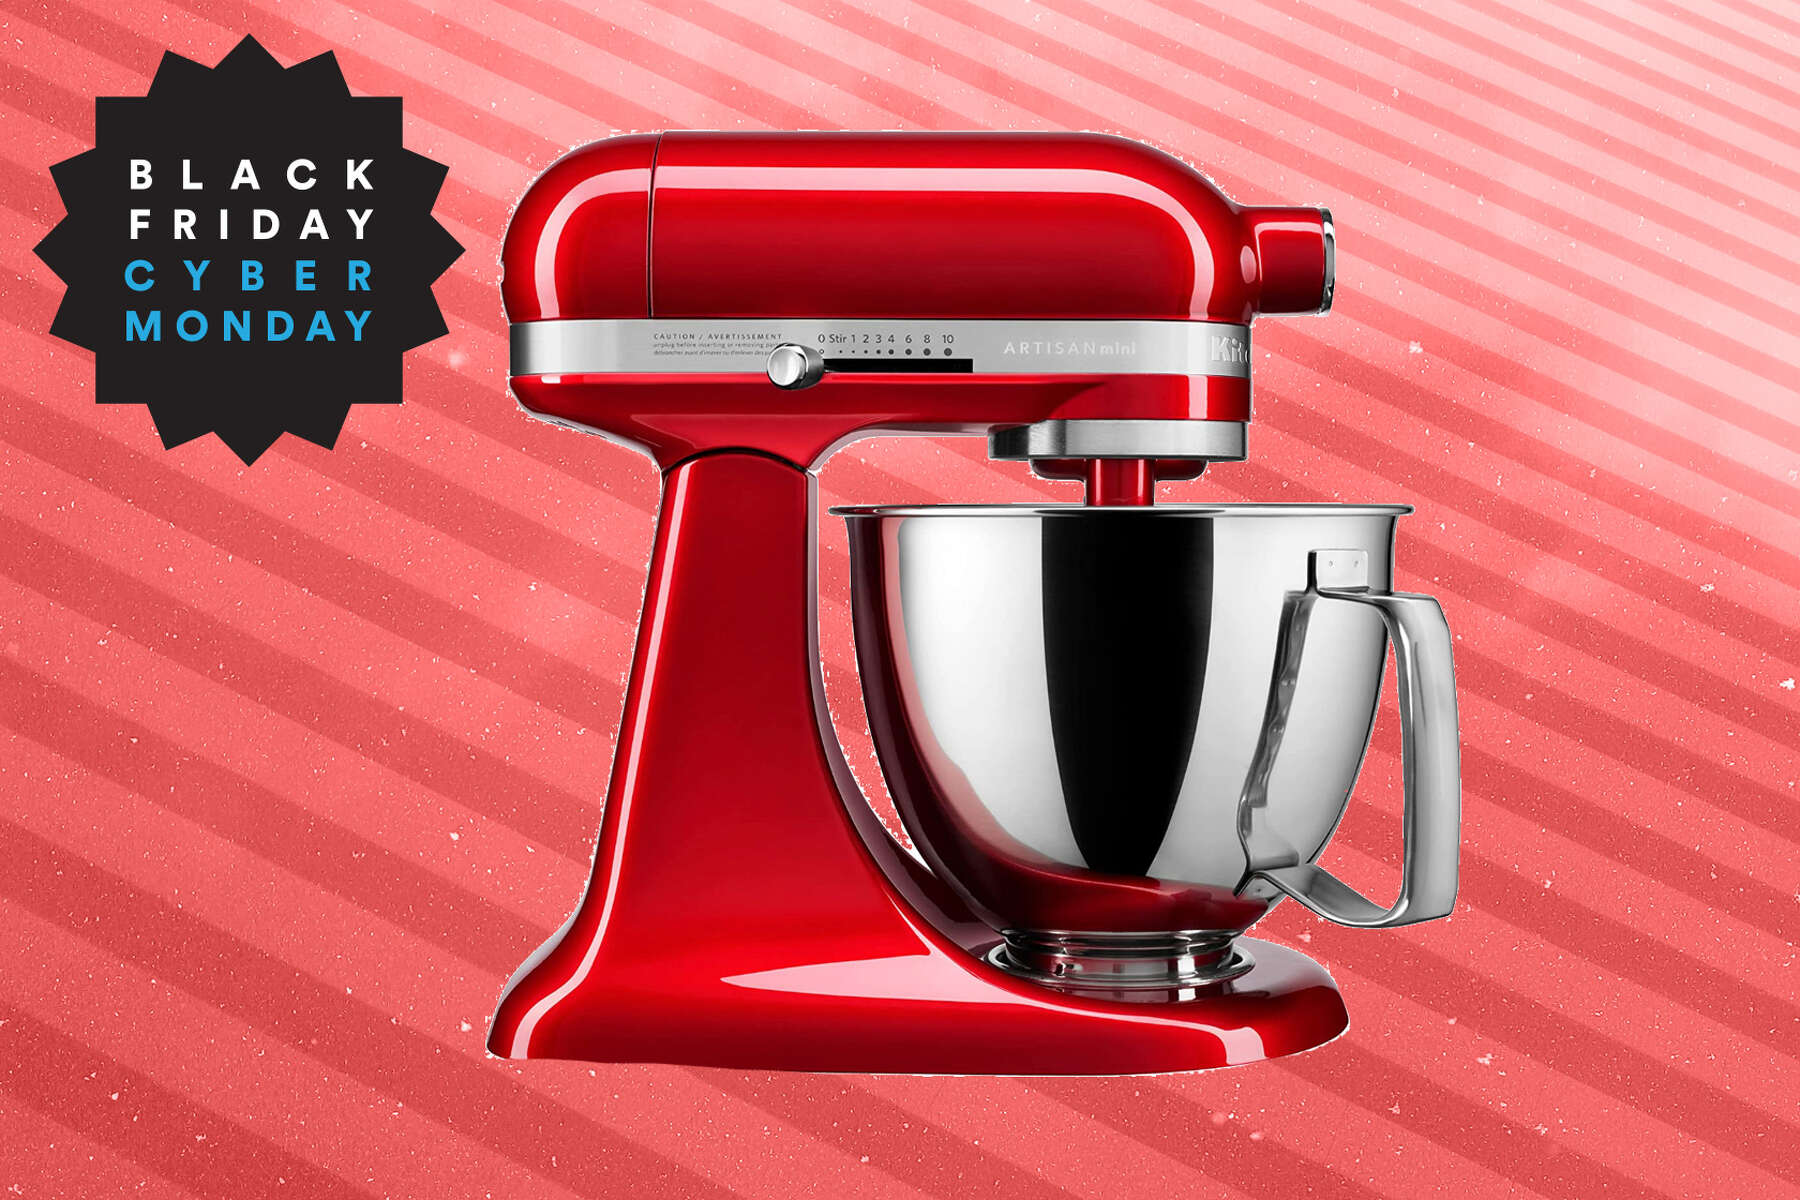 Best KitchenAid deal: Artisan Series Stand Mixer on sale for $379.99